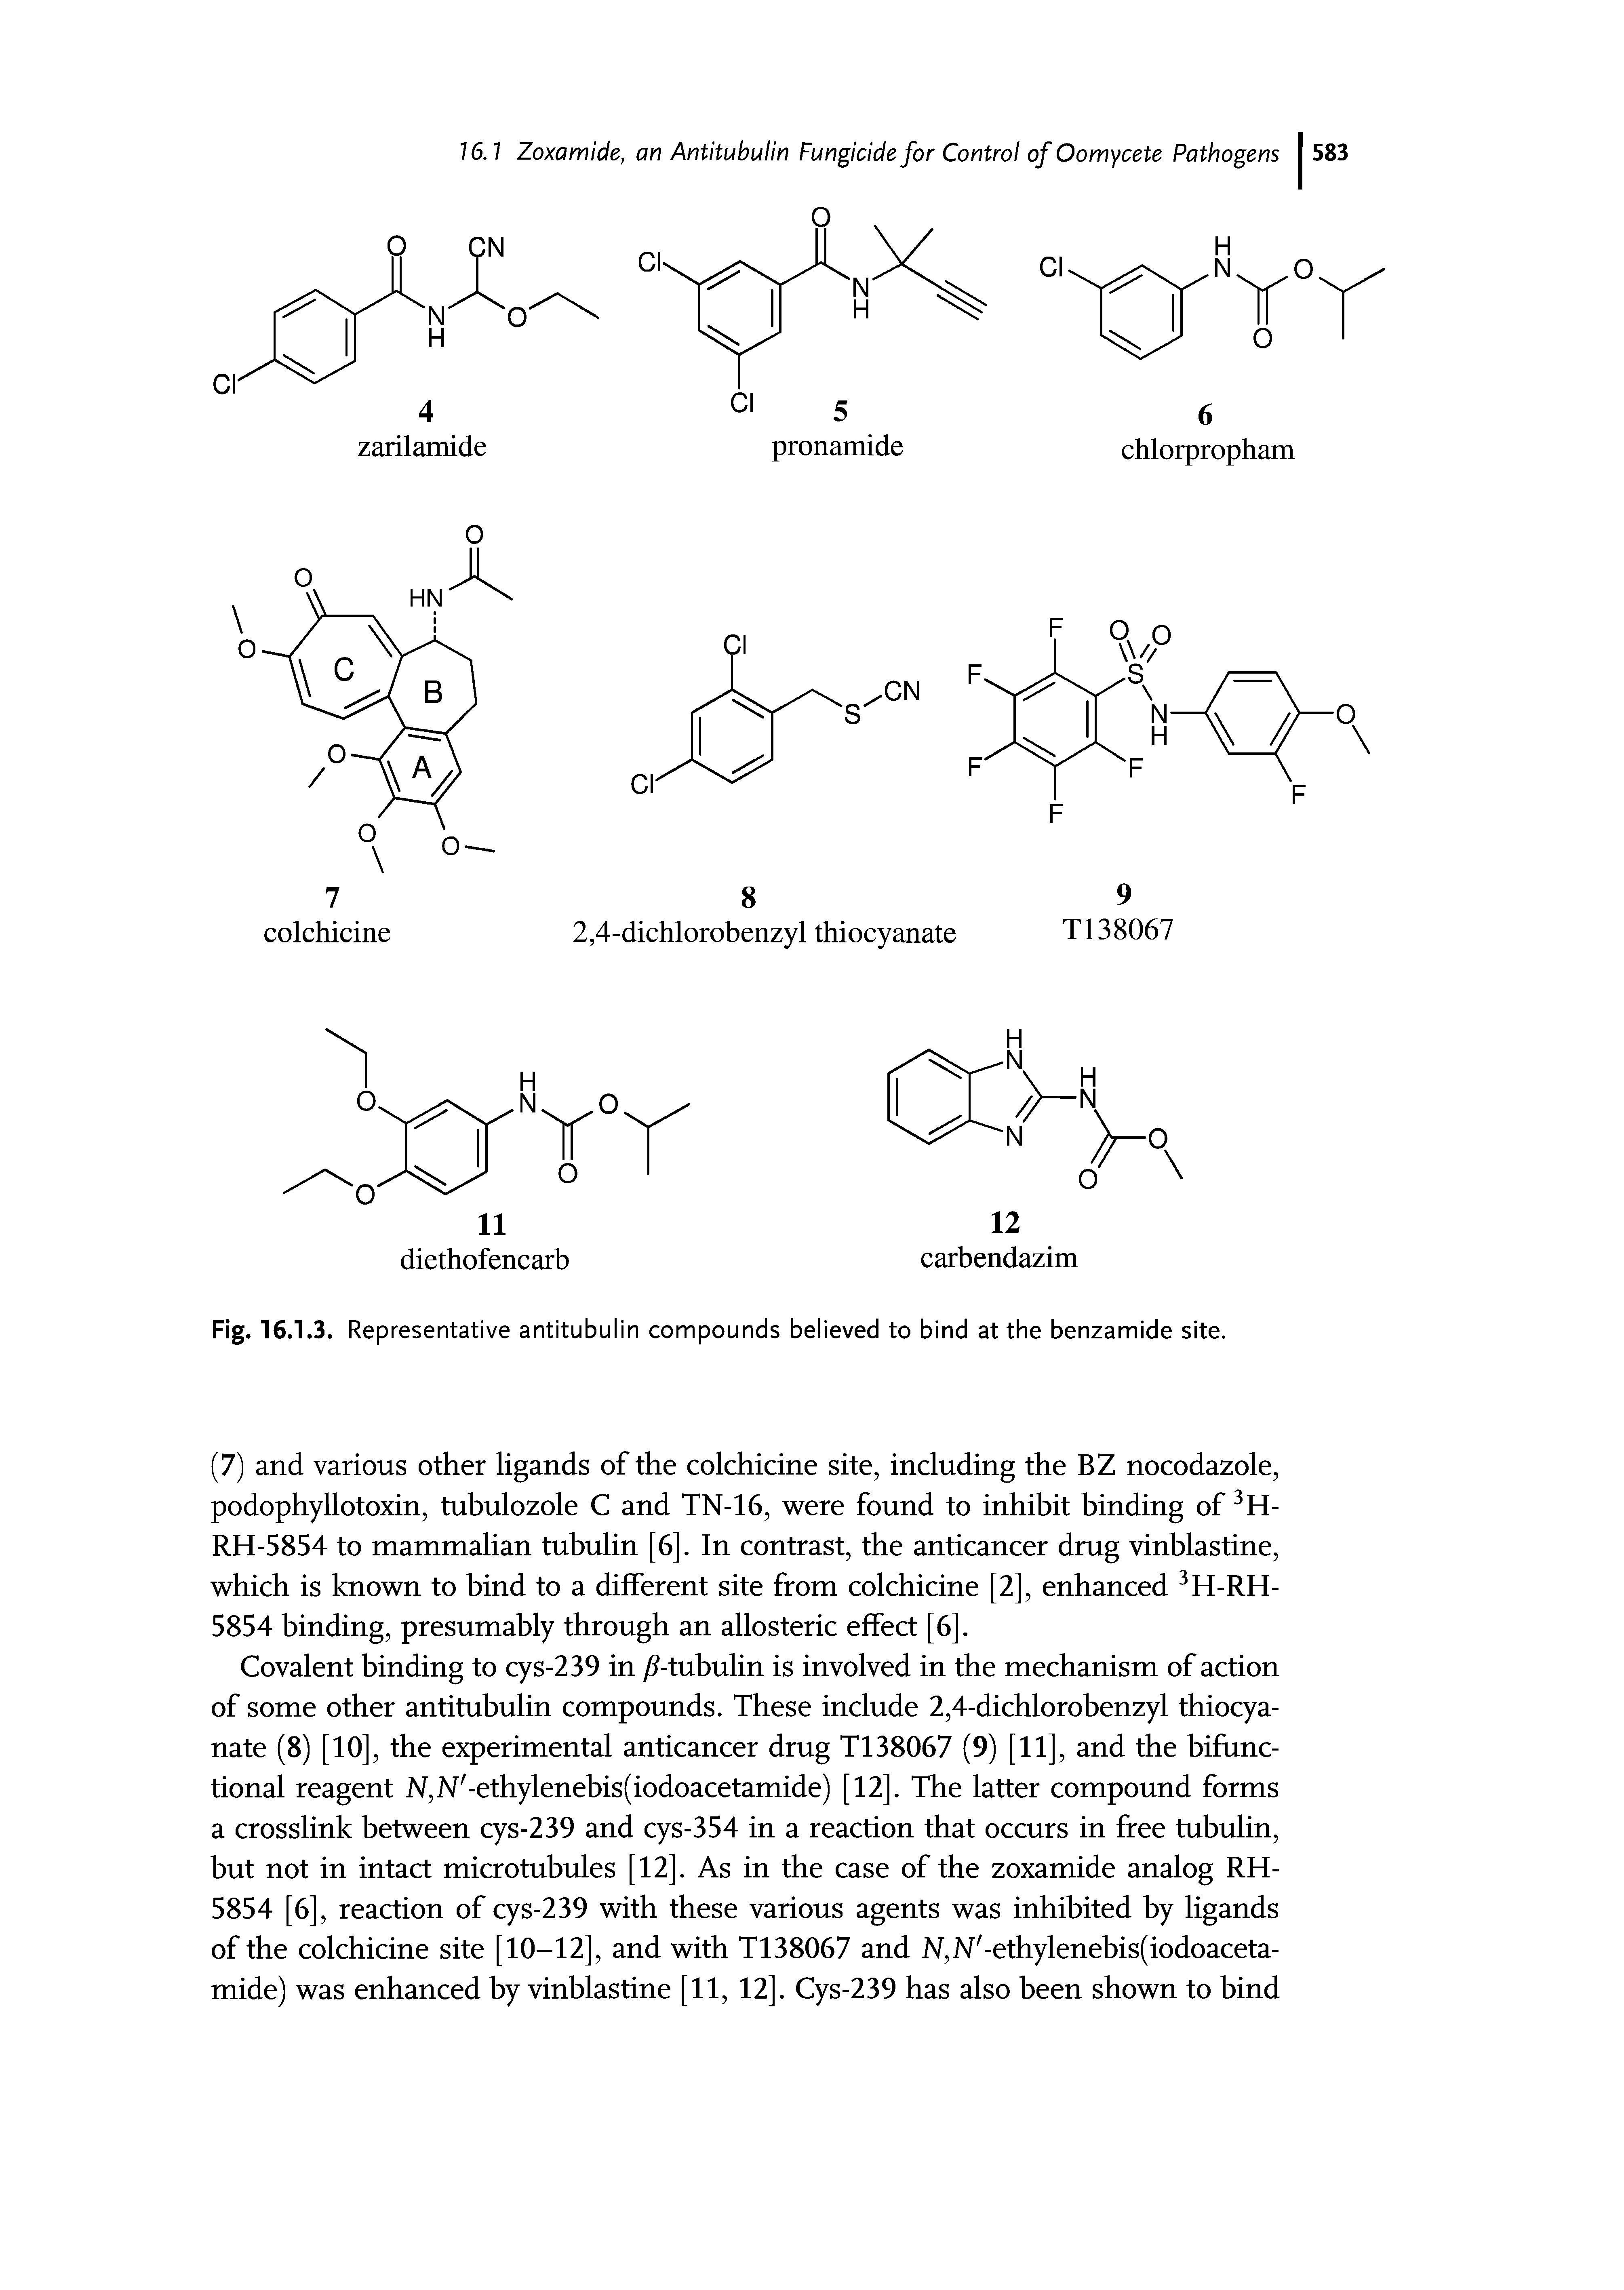 Fig. 16.1.3. Representative antitubulin compounds believed to bind at the benzamide site.